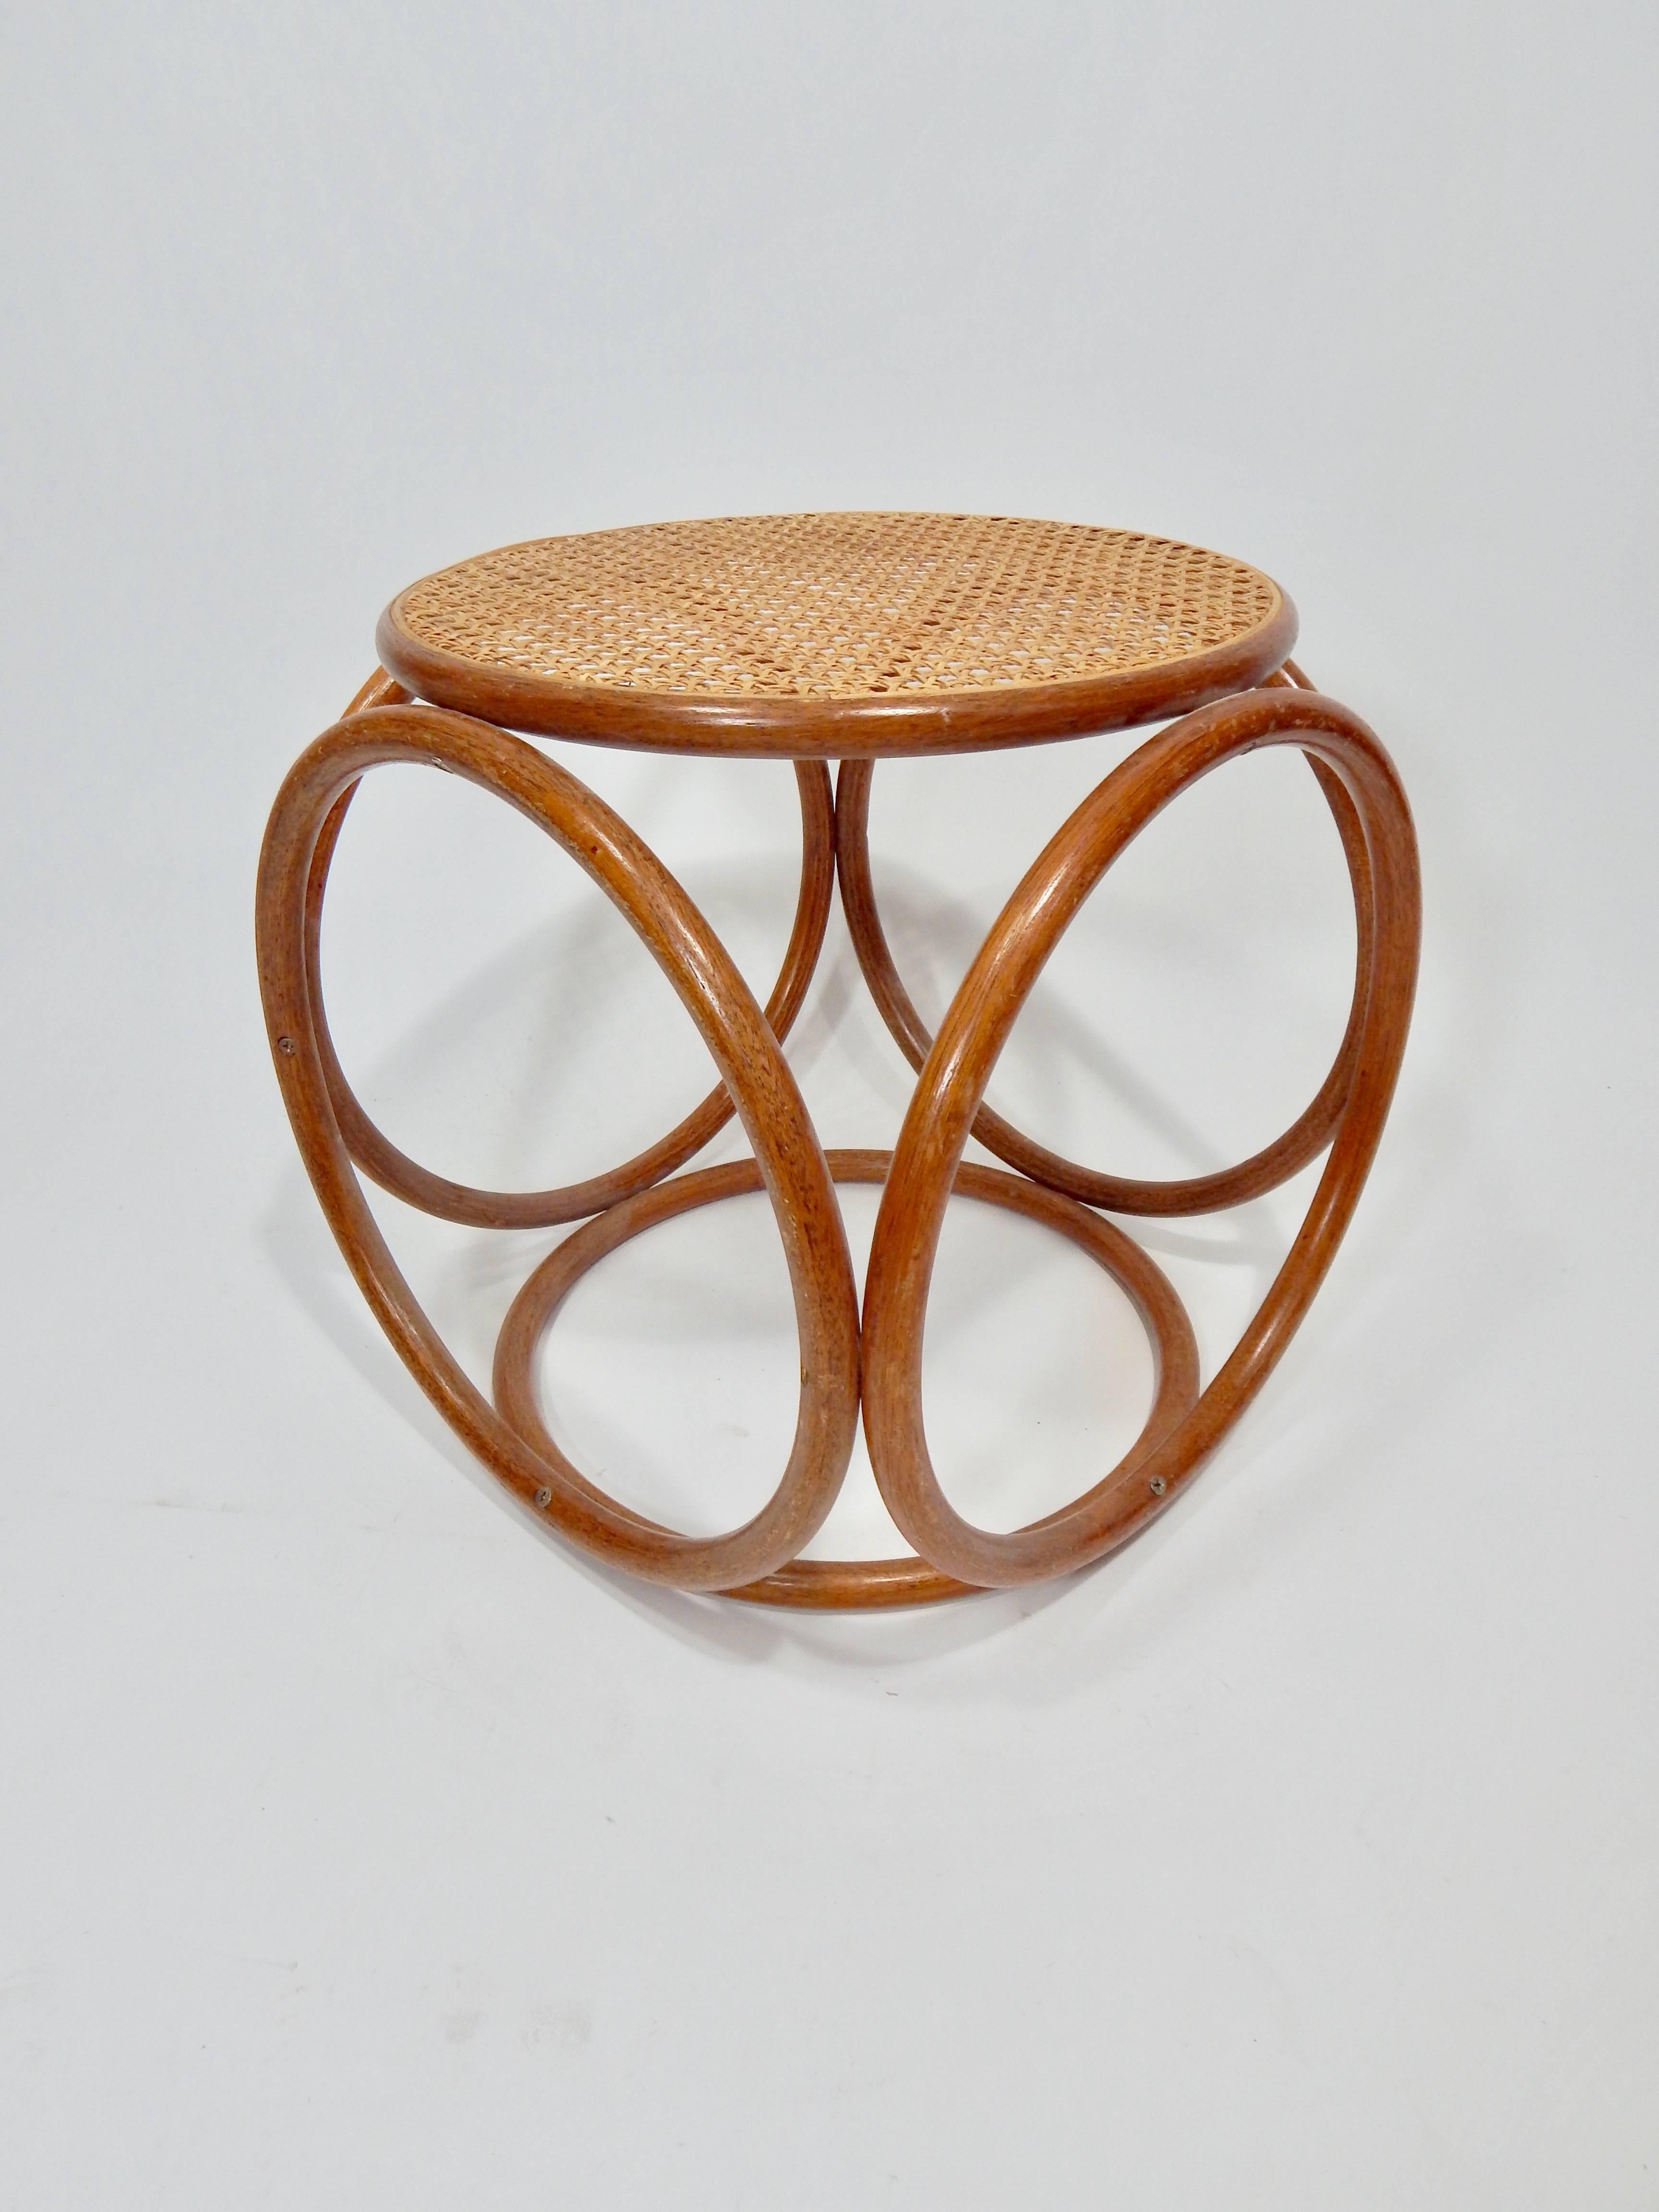 20th Century Thonet Bentwood and Cane Stool Ottoman